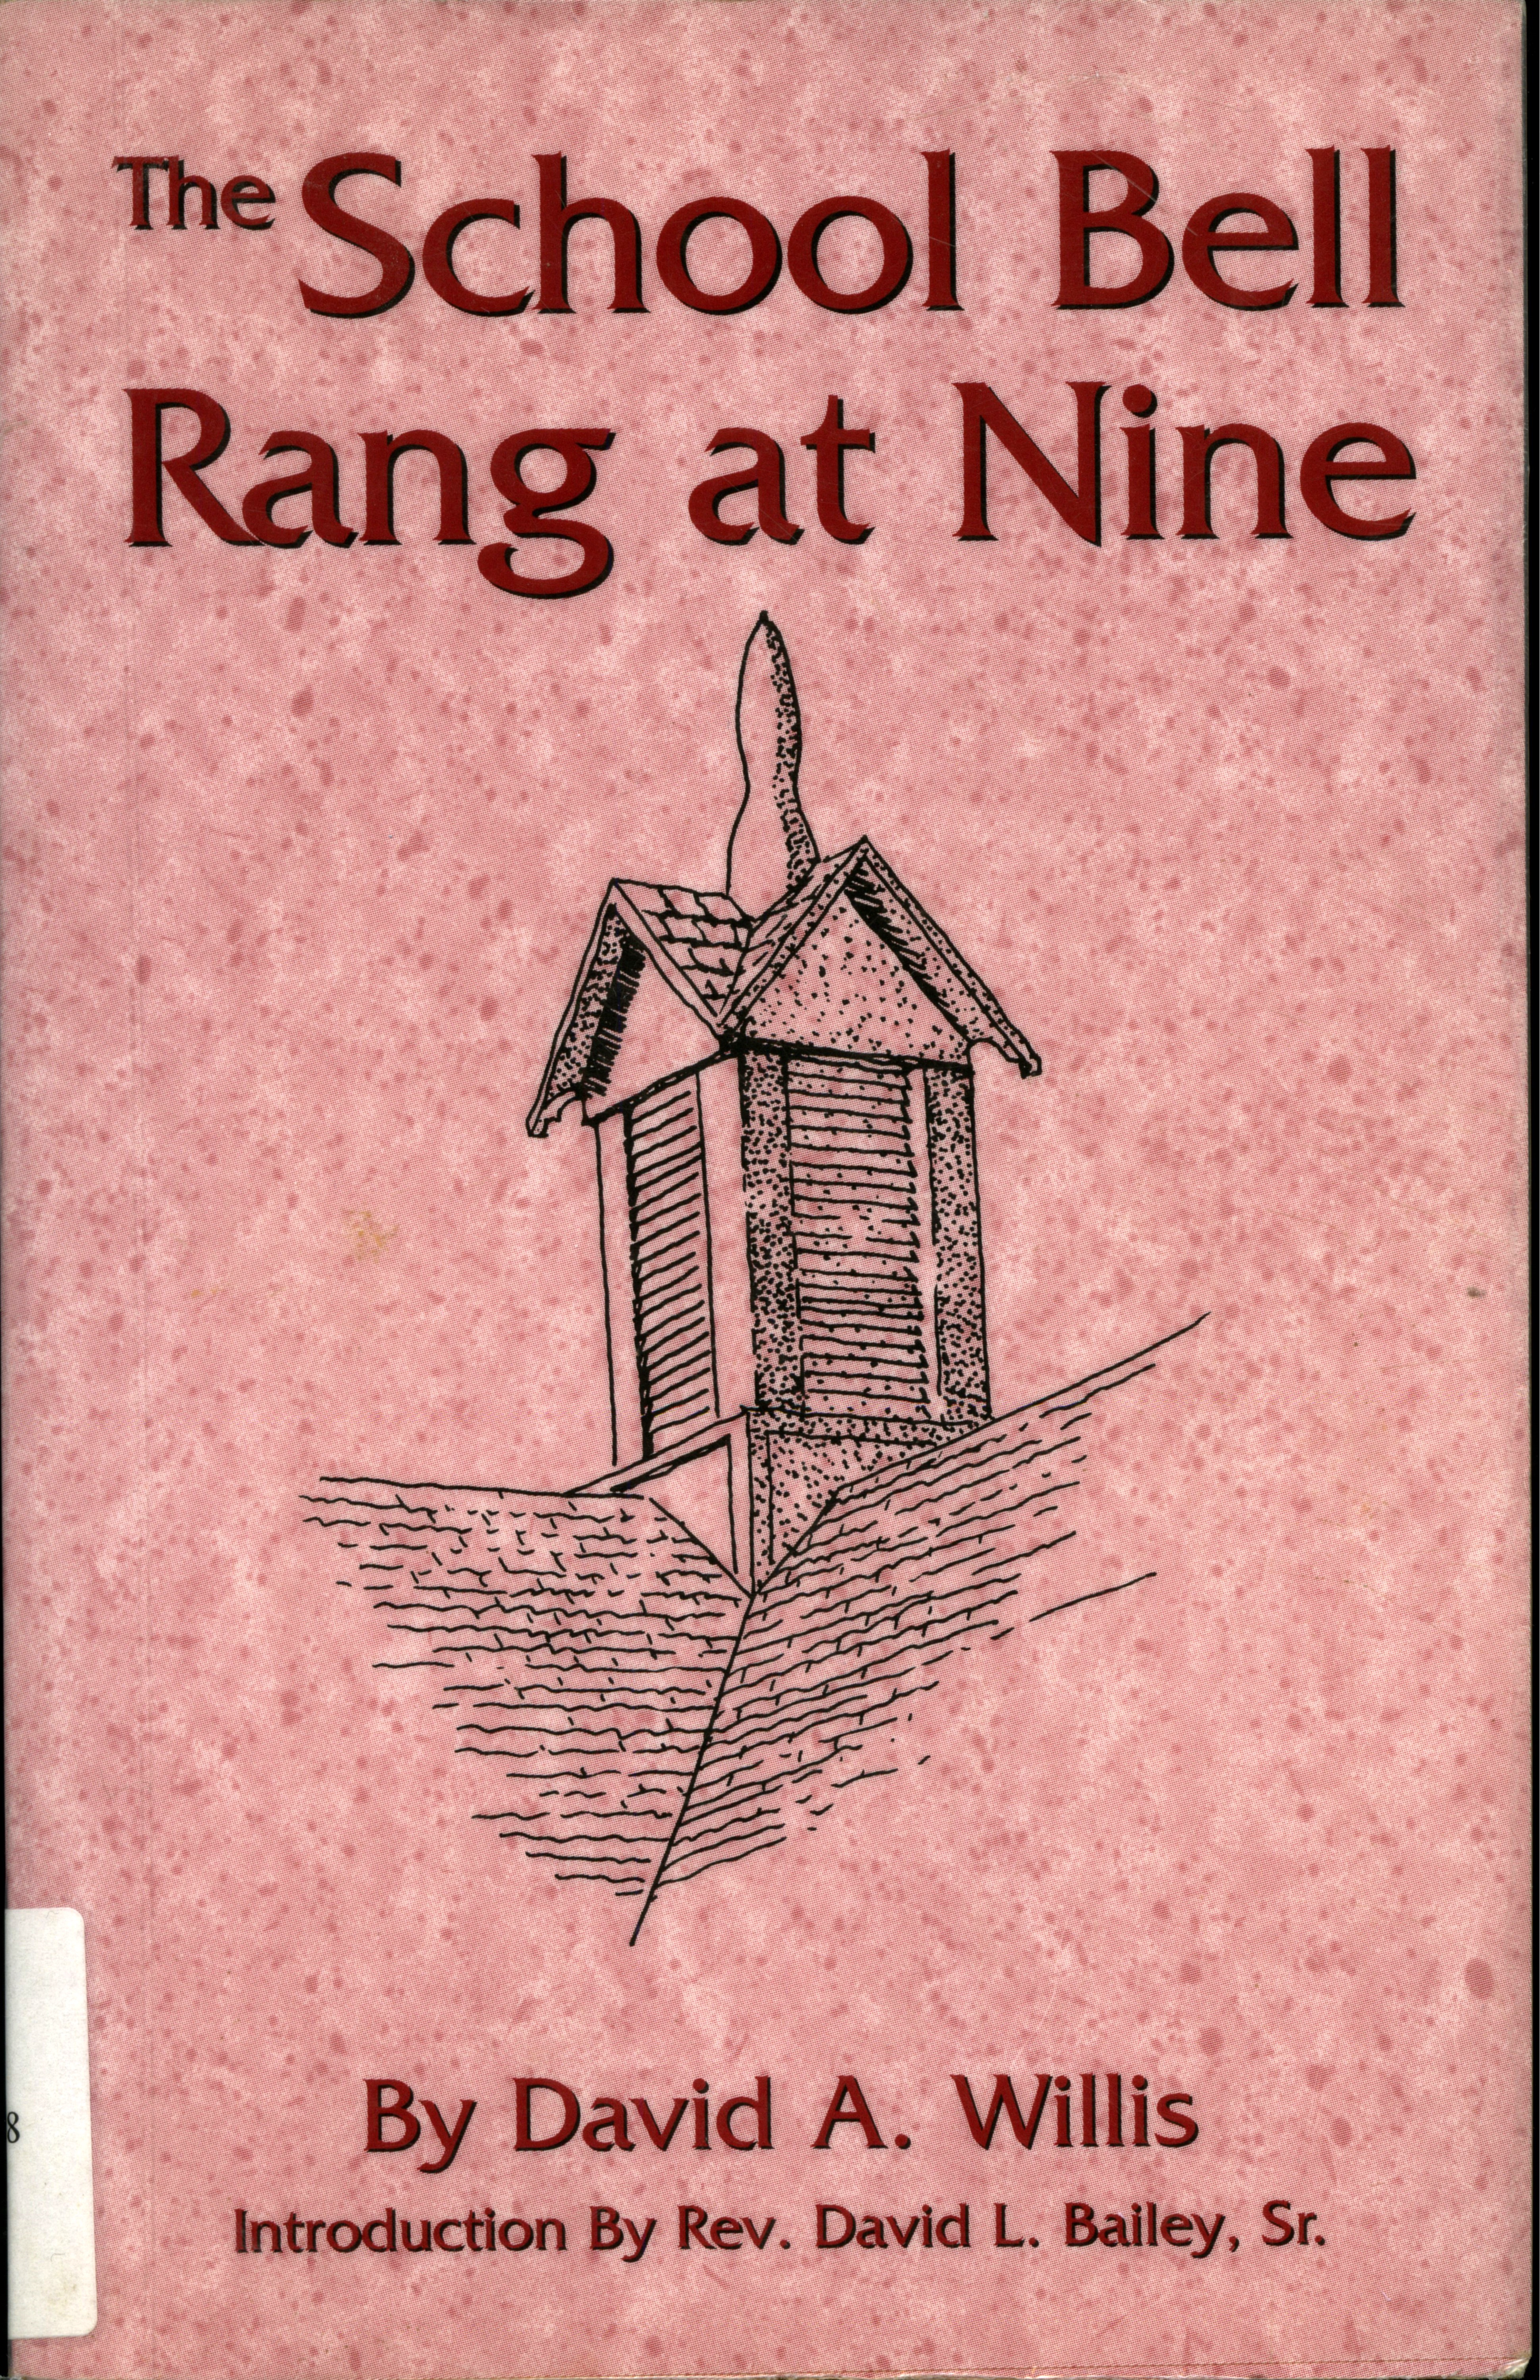 TheBook Cover: The School Bell Rang at Nine by David A. Willis